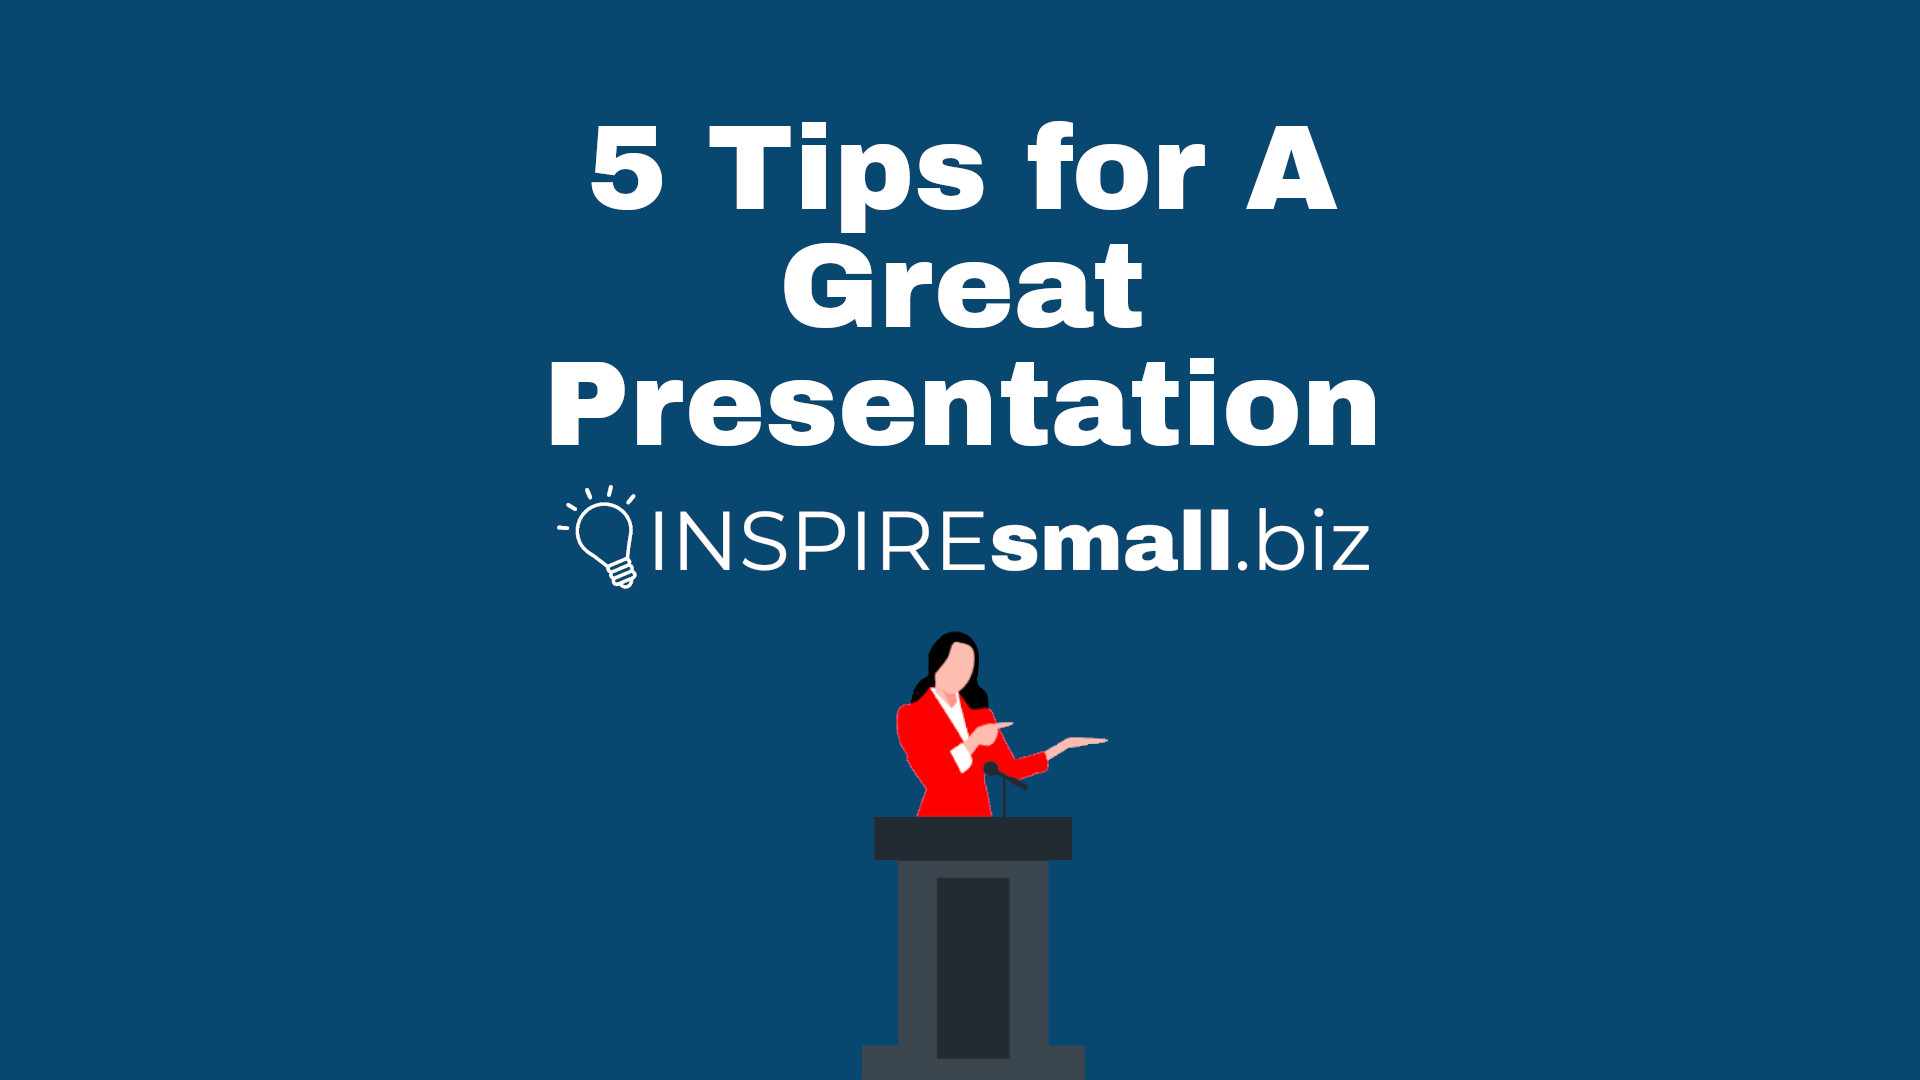 Image of woman standing at a podium with "5 Tips for A Great Presentation" and the INSPIREsmall.biz logo above her.